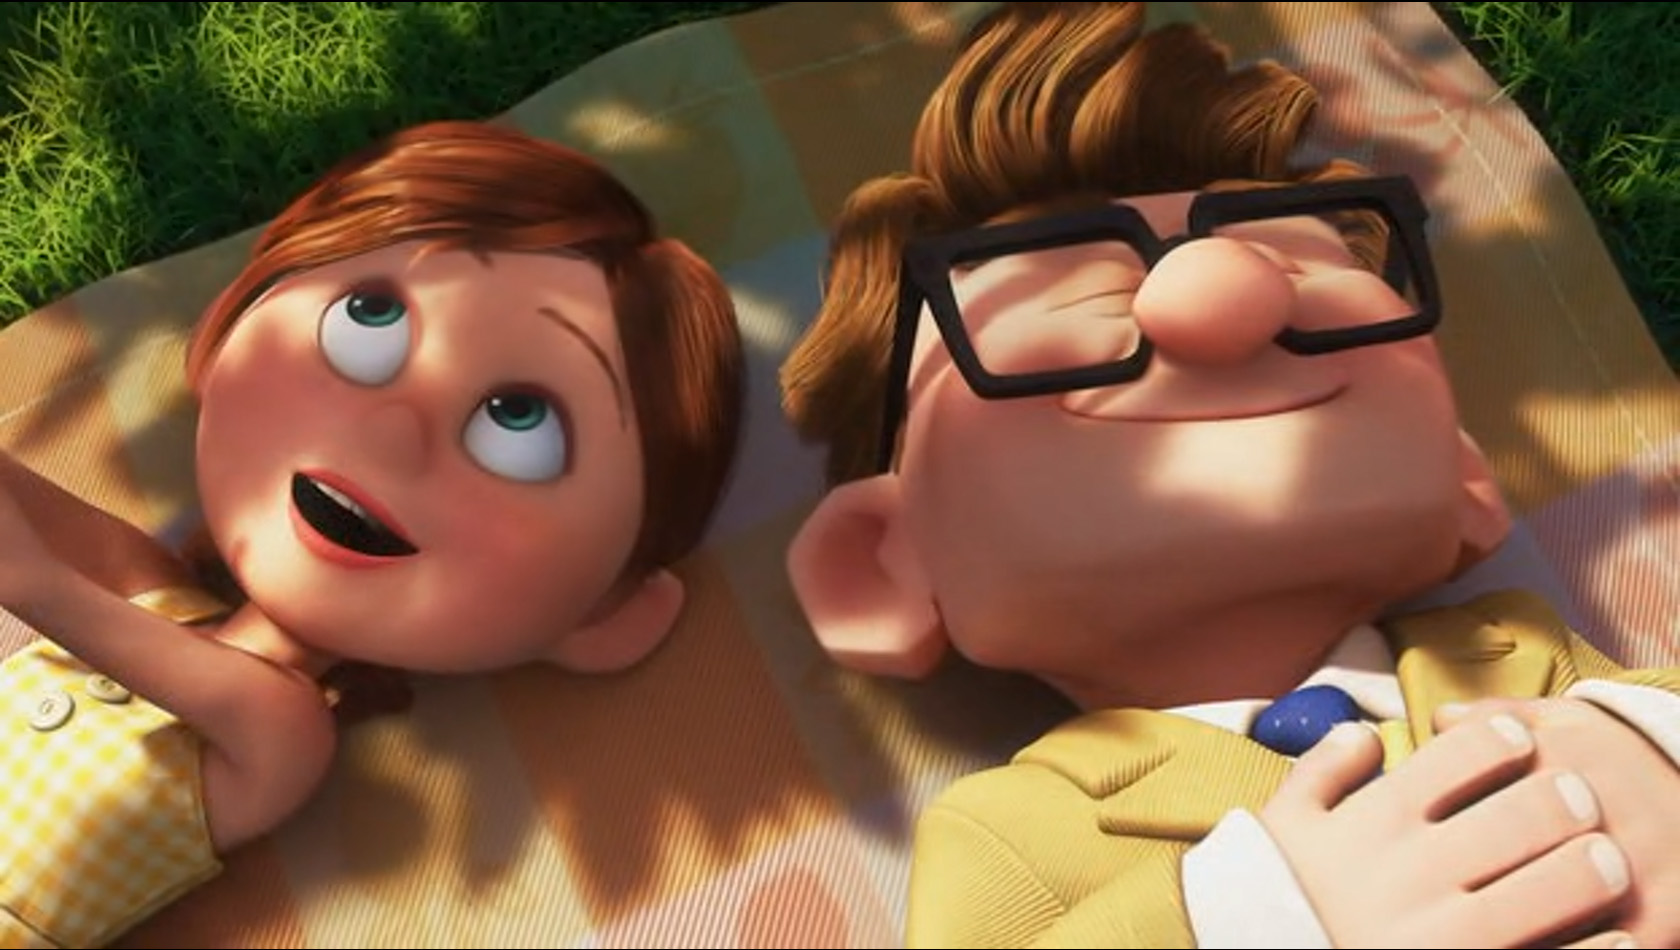 The Best Moments in Film History: Carl and Ellie&#39;s love story in “UP” - up_3